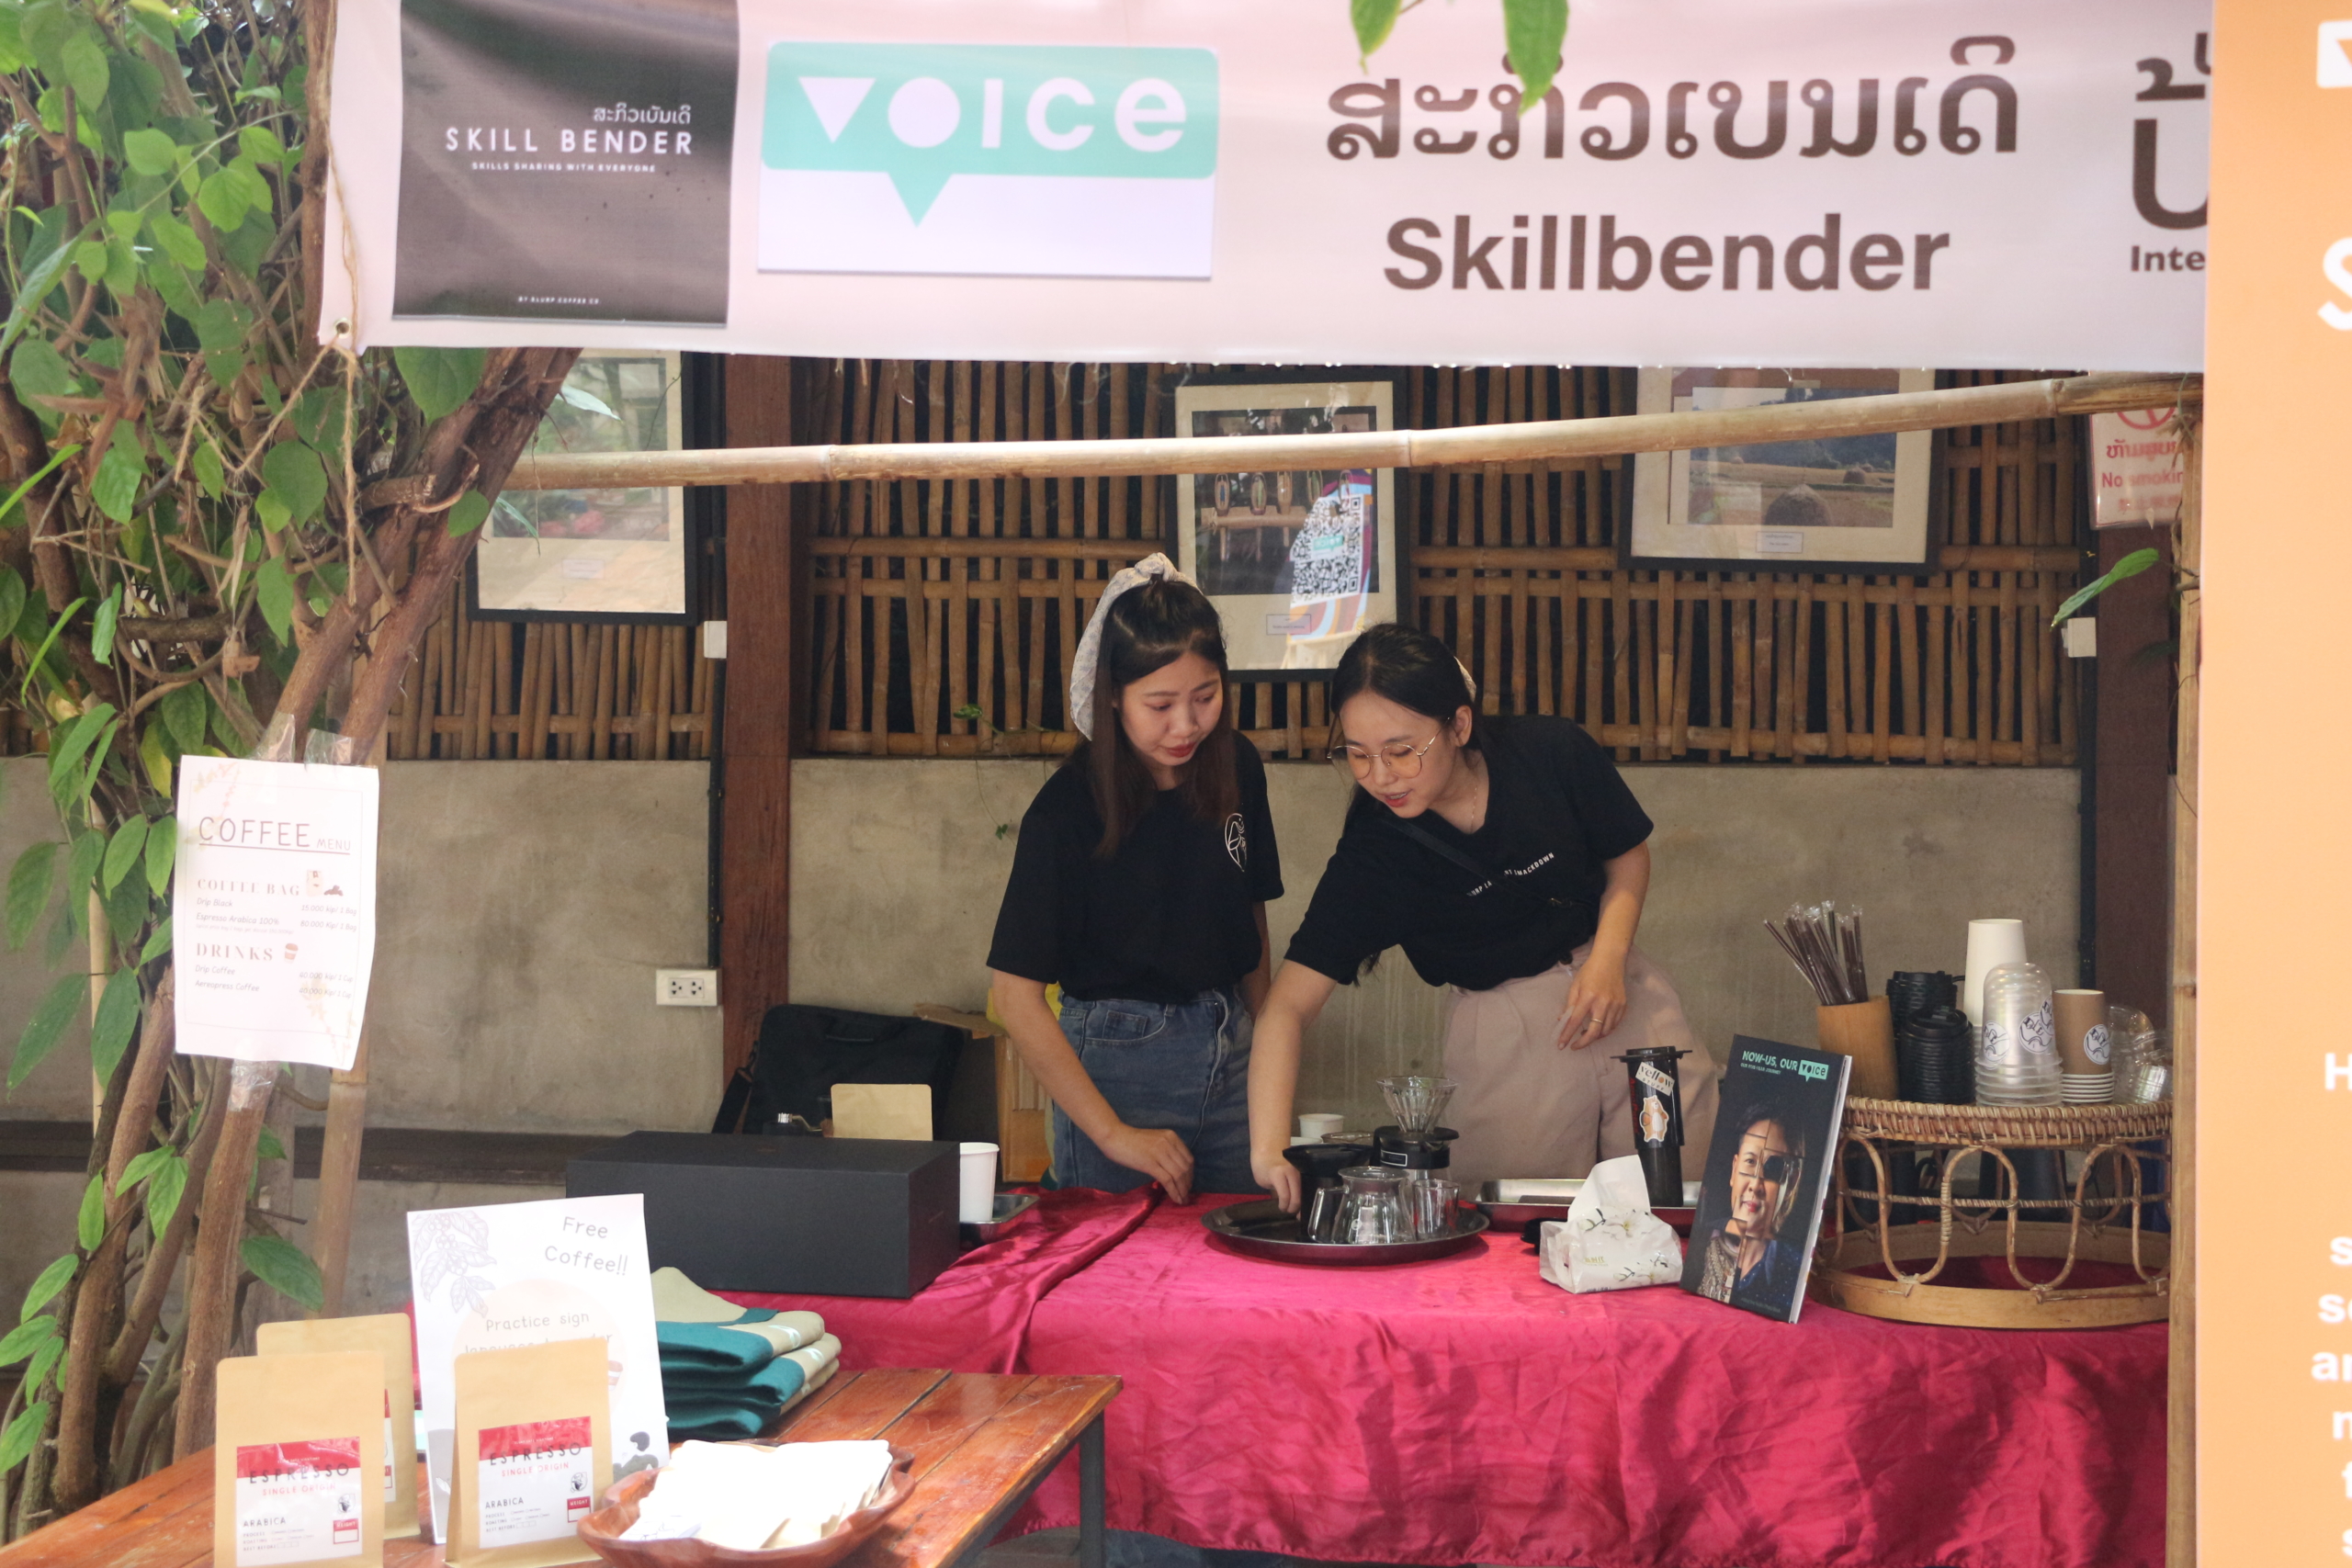 Noy (left) and Ming (Right) from Skillbender preparing for the Festival.